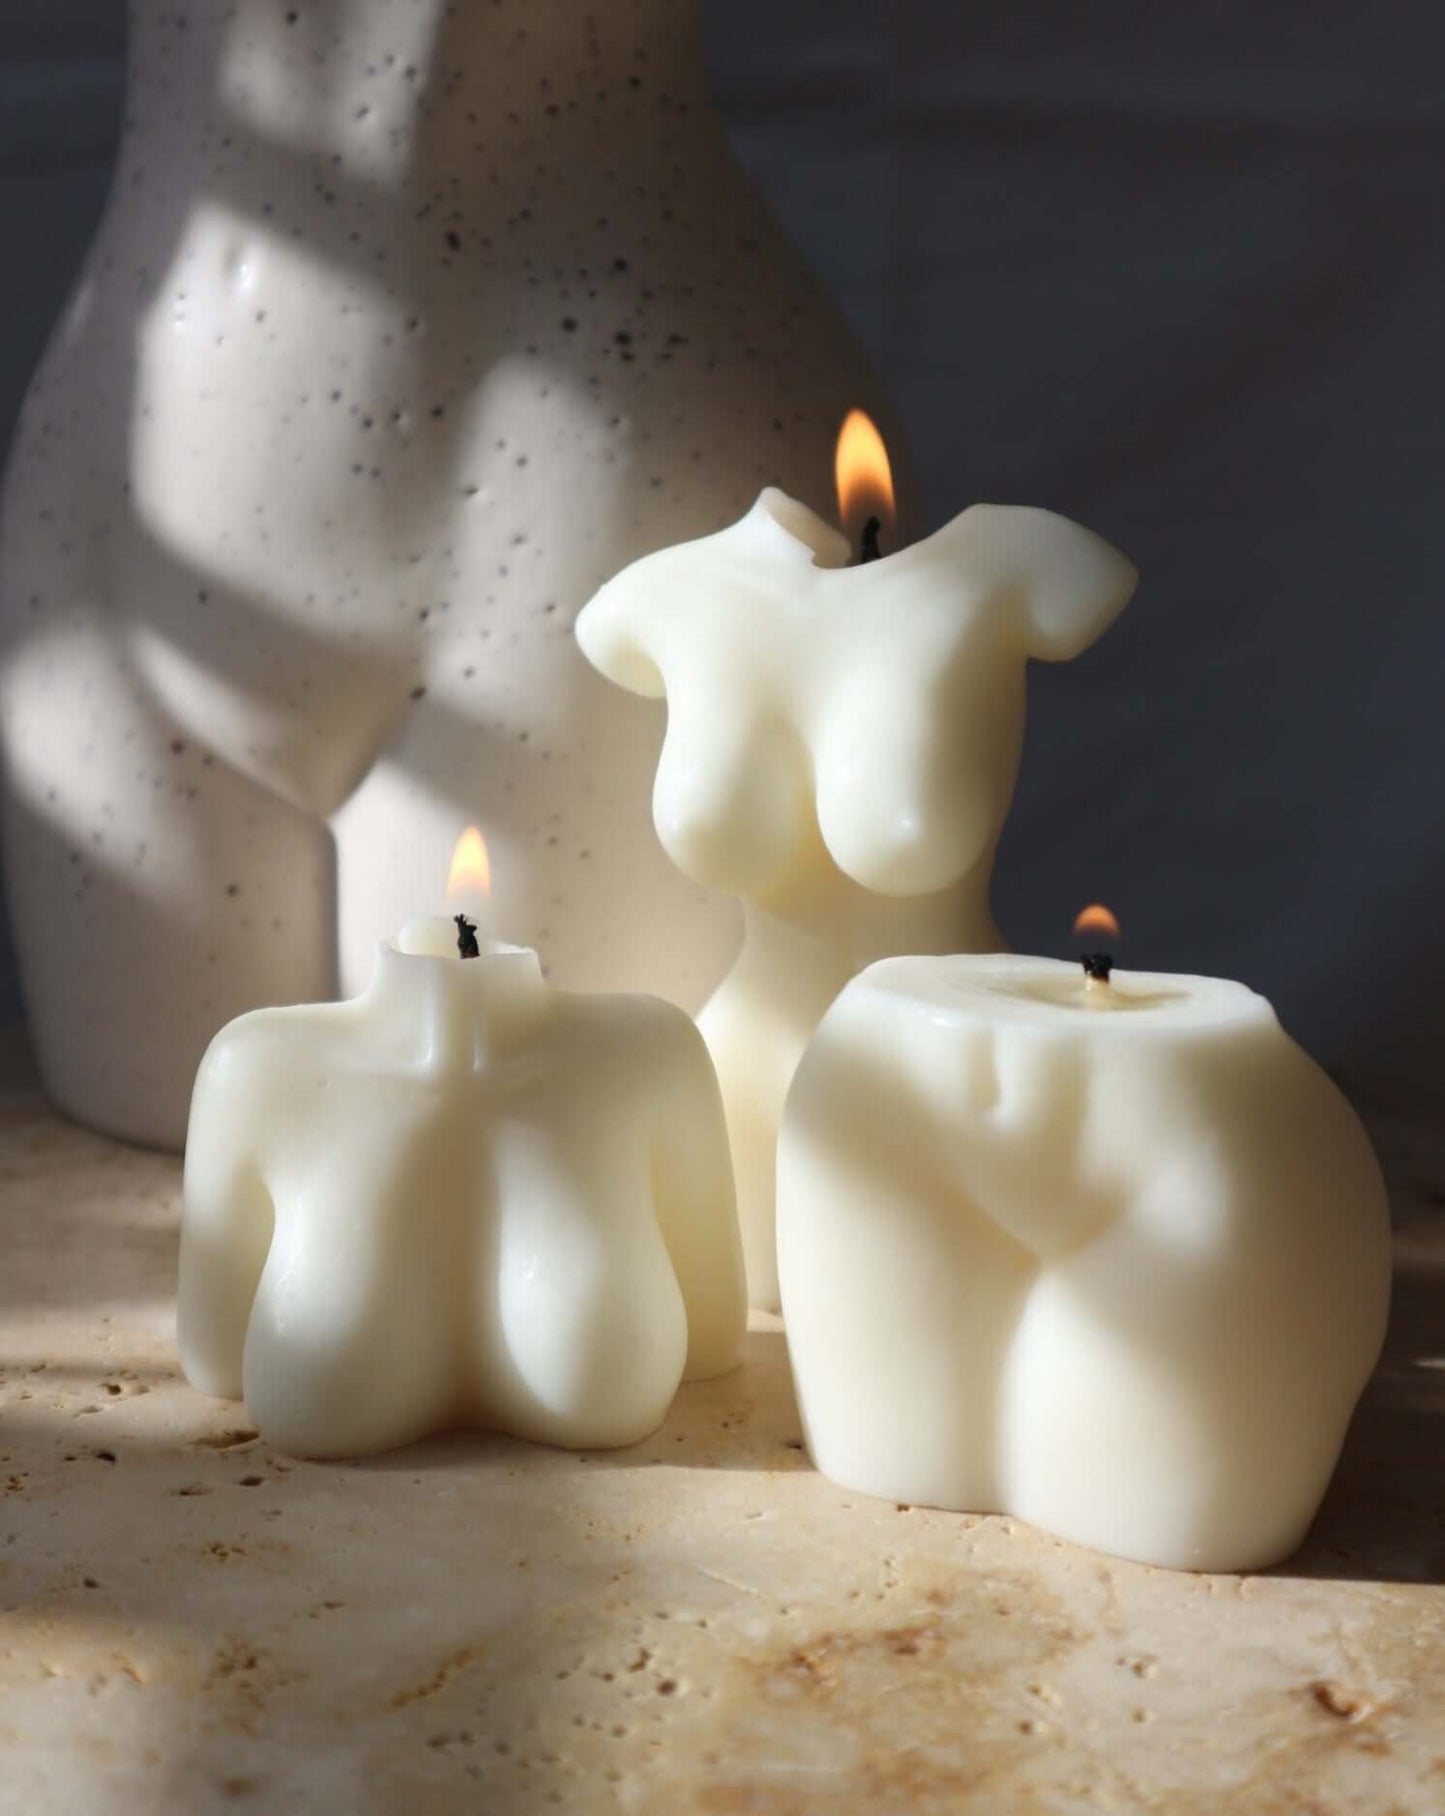 Body Torso Candle Gift Sets | Empowering women body torso candle gift sets | Body Positivity | Body Candles Australia | Body Torso Candles | Scented Candles | Unscented Candles | Candles Australia | Free Standing Candles Australia | Special Candles | Soy 